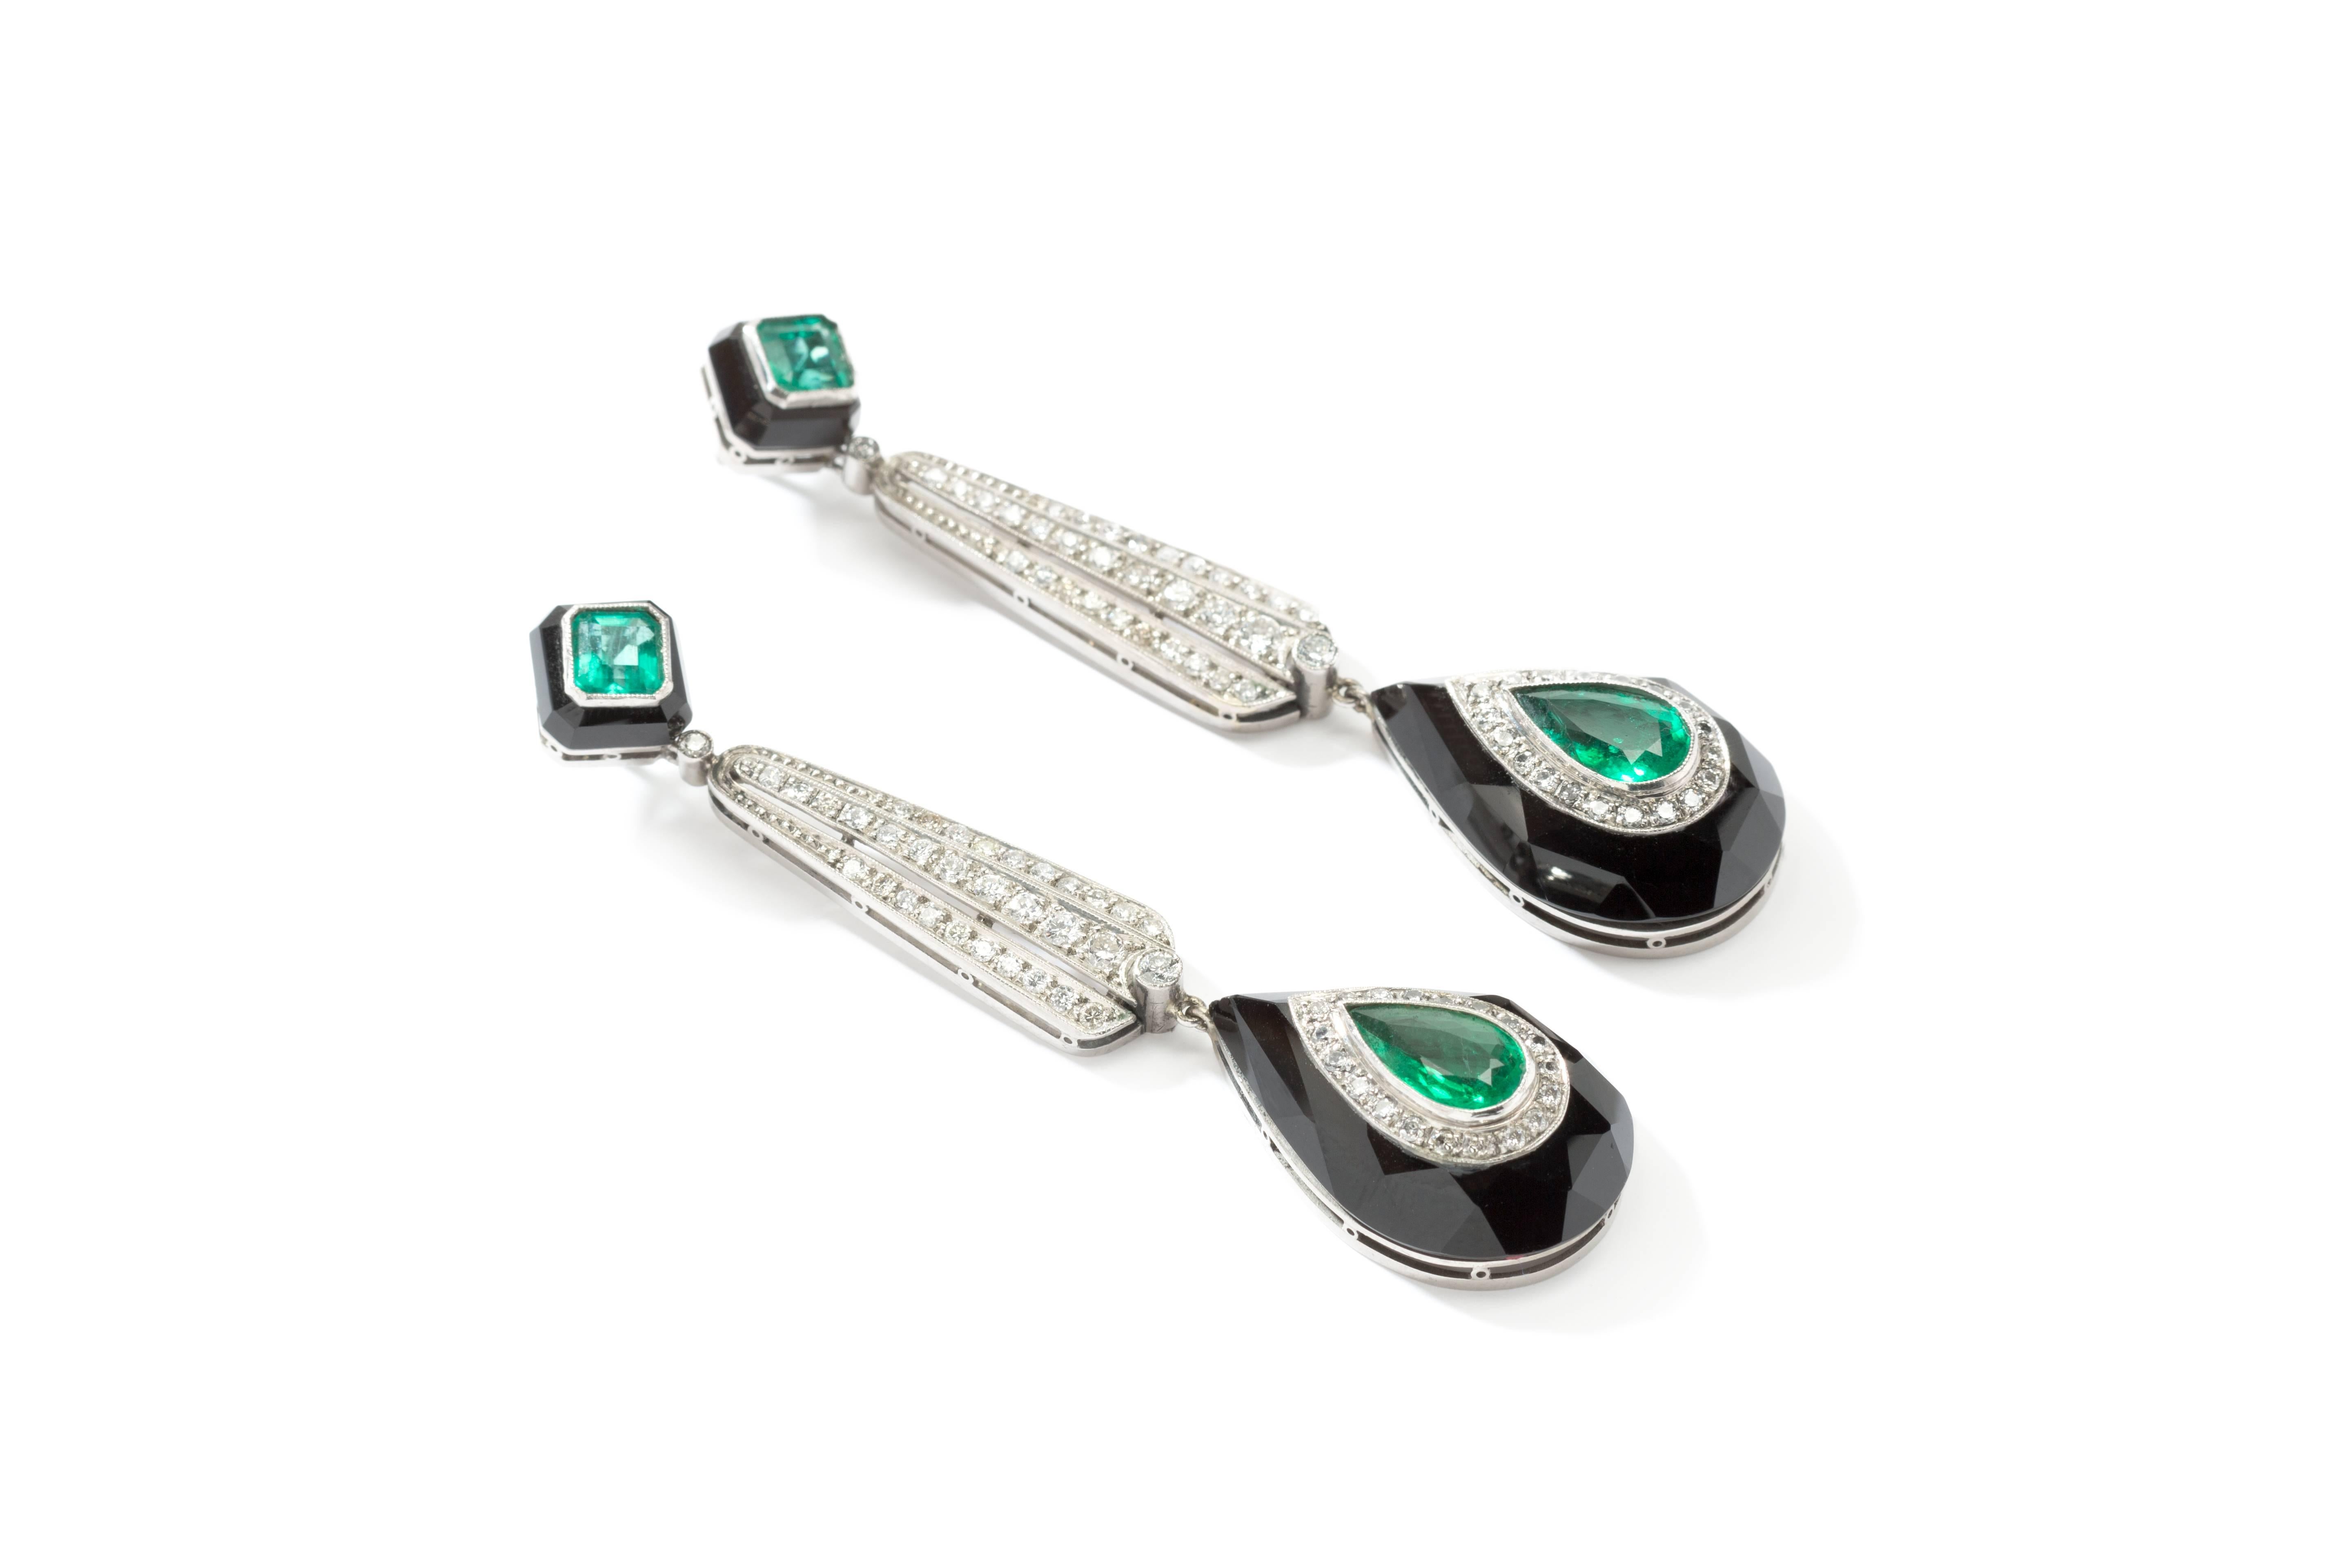 Composed of 2 emerald-cut colombian emeralds, 2 pear-shaped colombian emeralds with a total weight of 4,30 ct. 84 brilliant-cut diamonds weighing approximately 2,0 ct. Accented by onyx. Mounted in platinum. Total weight: 17,1 g. Lenght: ca. 2.76 in